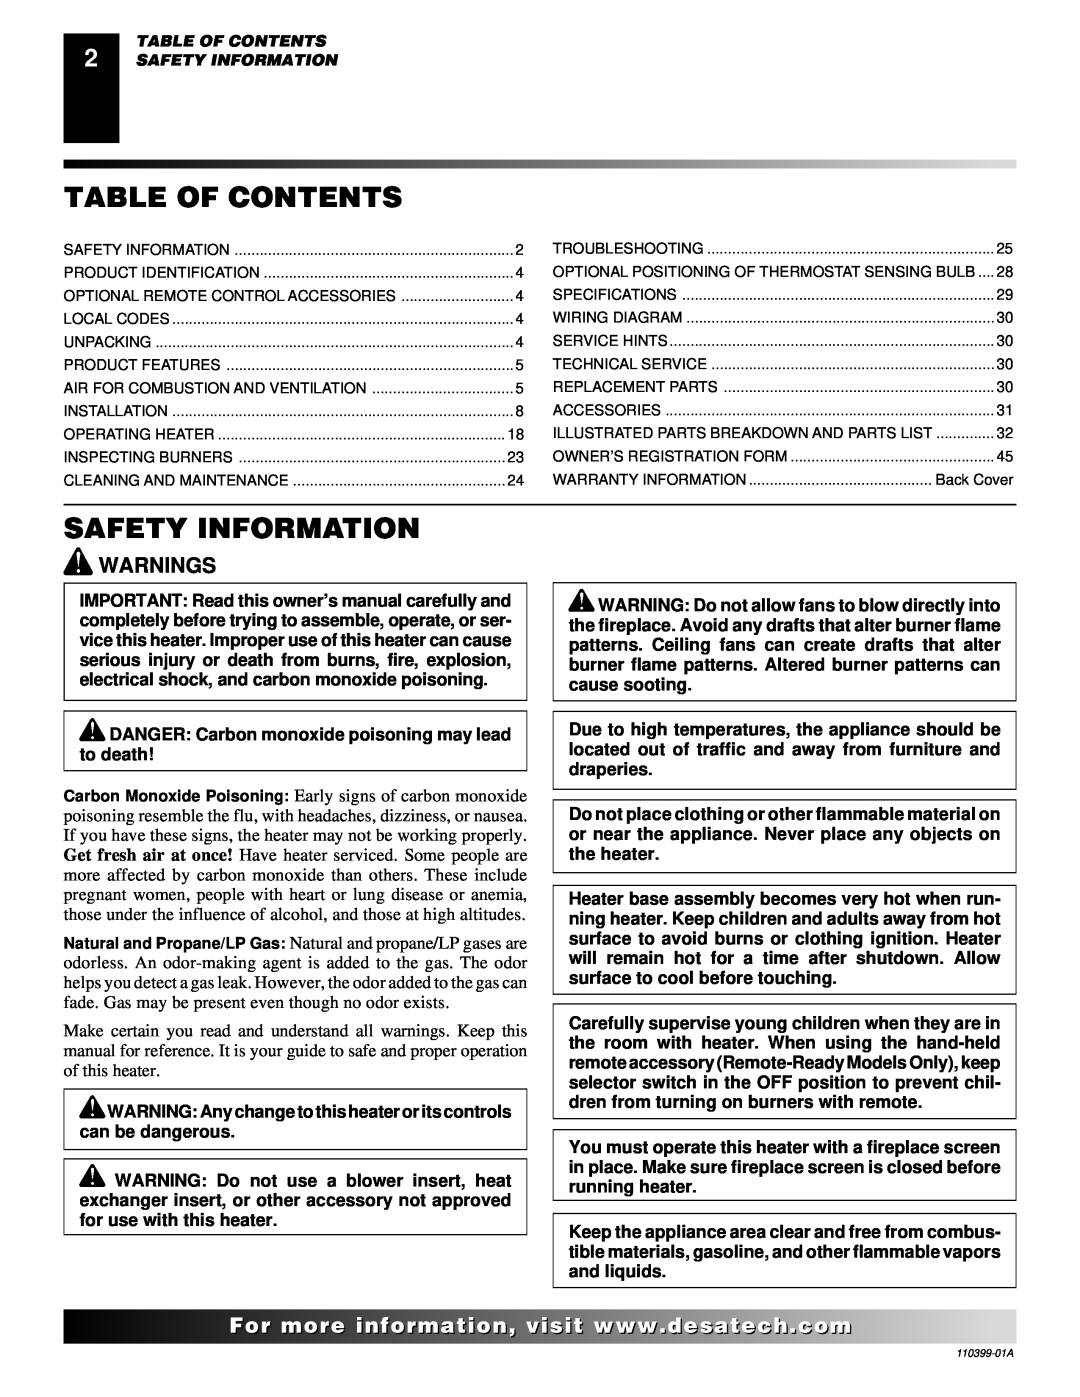 Desa FLAME-MAX Golden, FLAME-MAX Vintage installation manual Table Of Contents, Safety Information, Warnings 